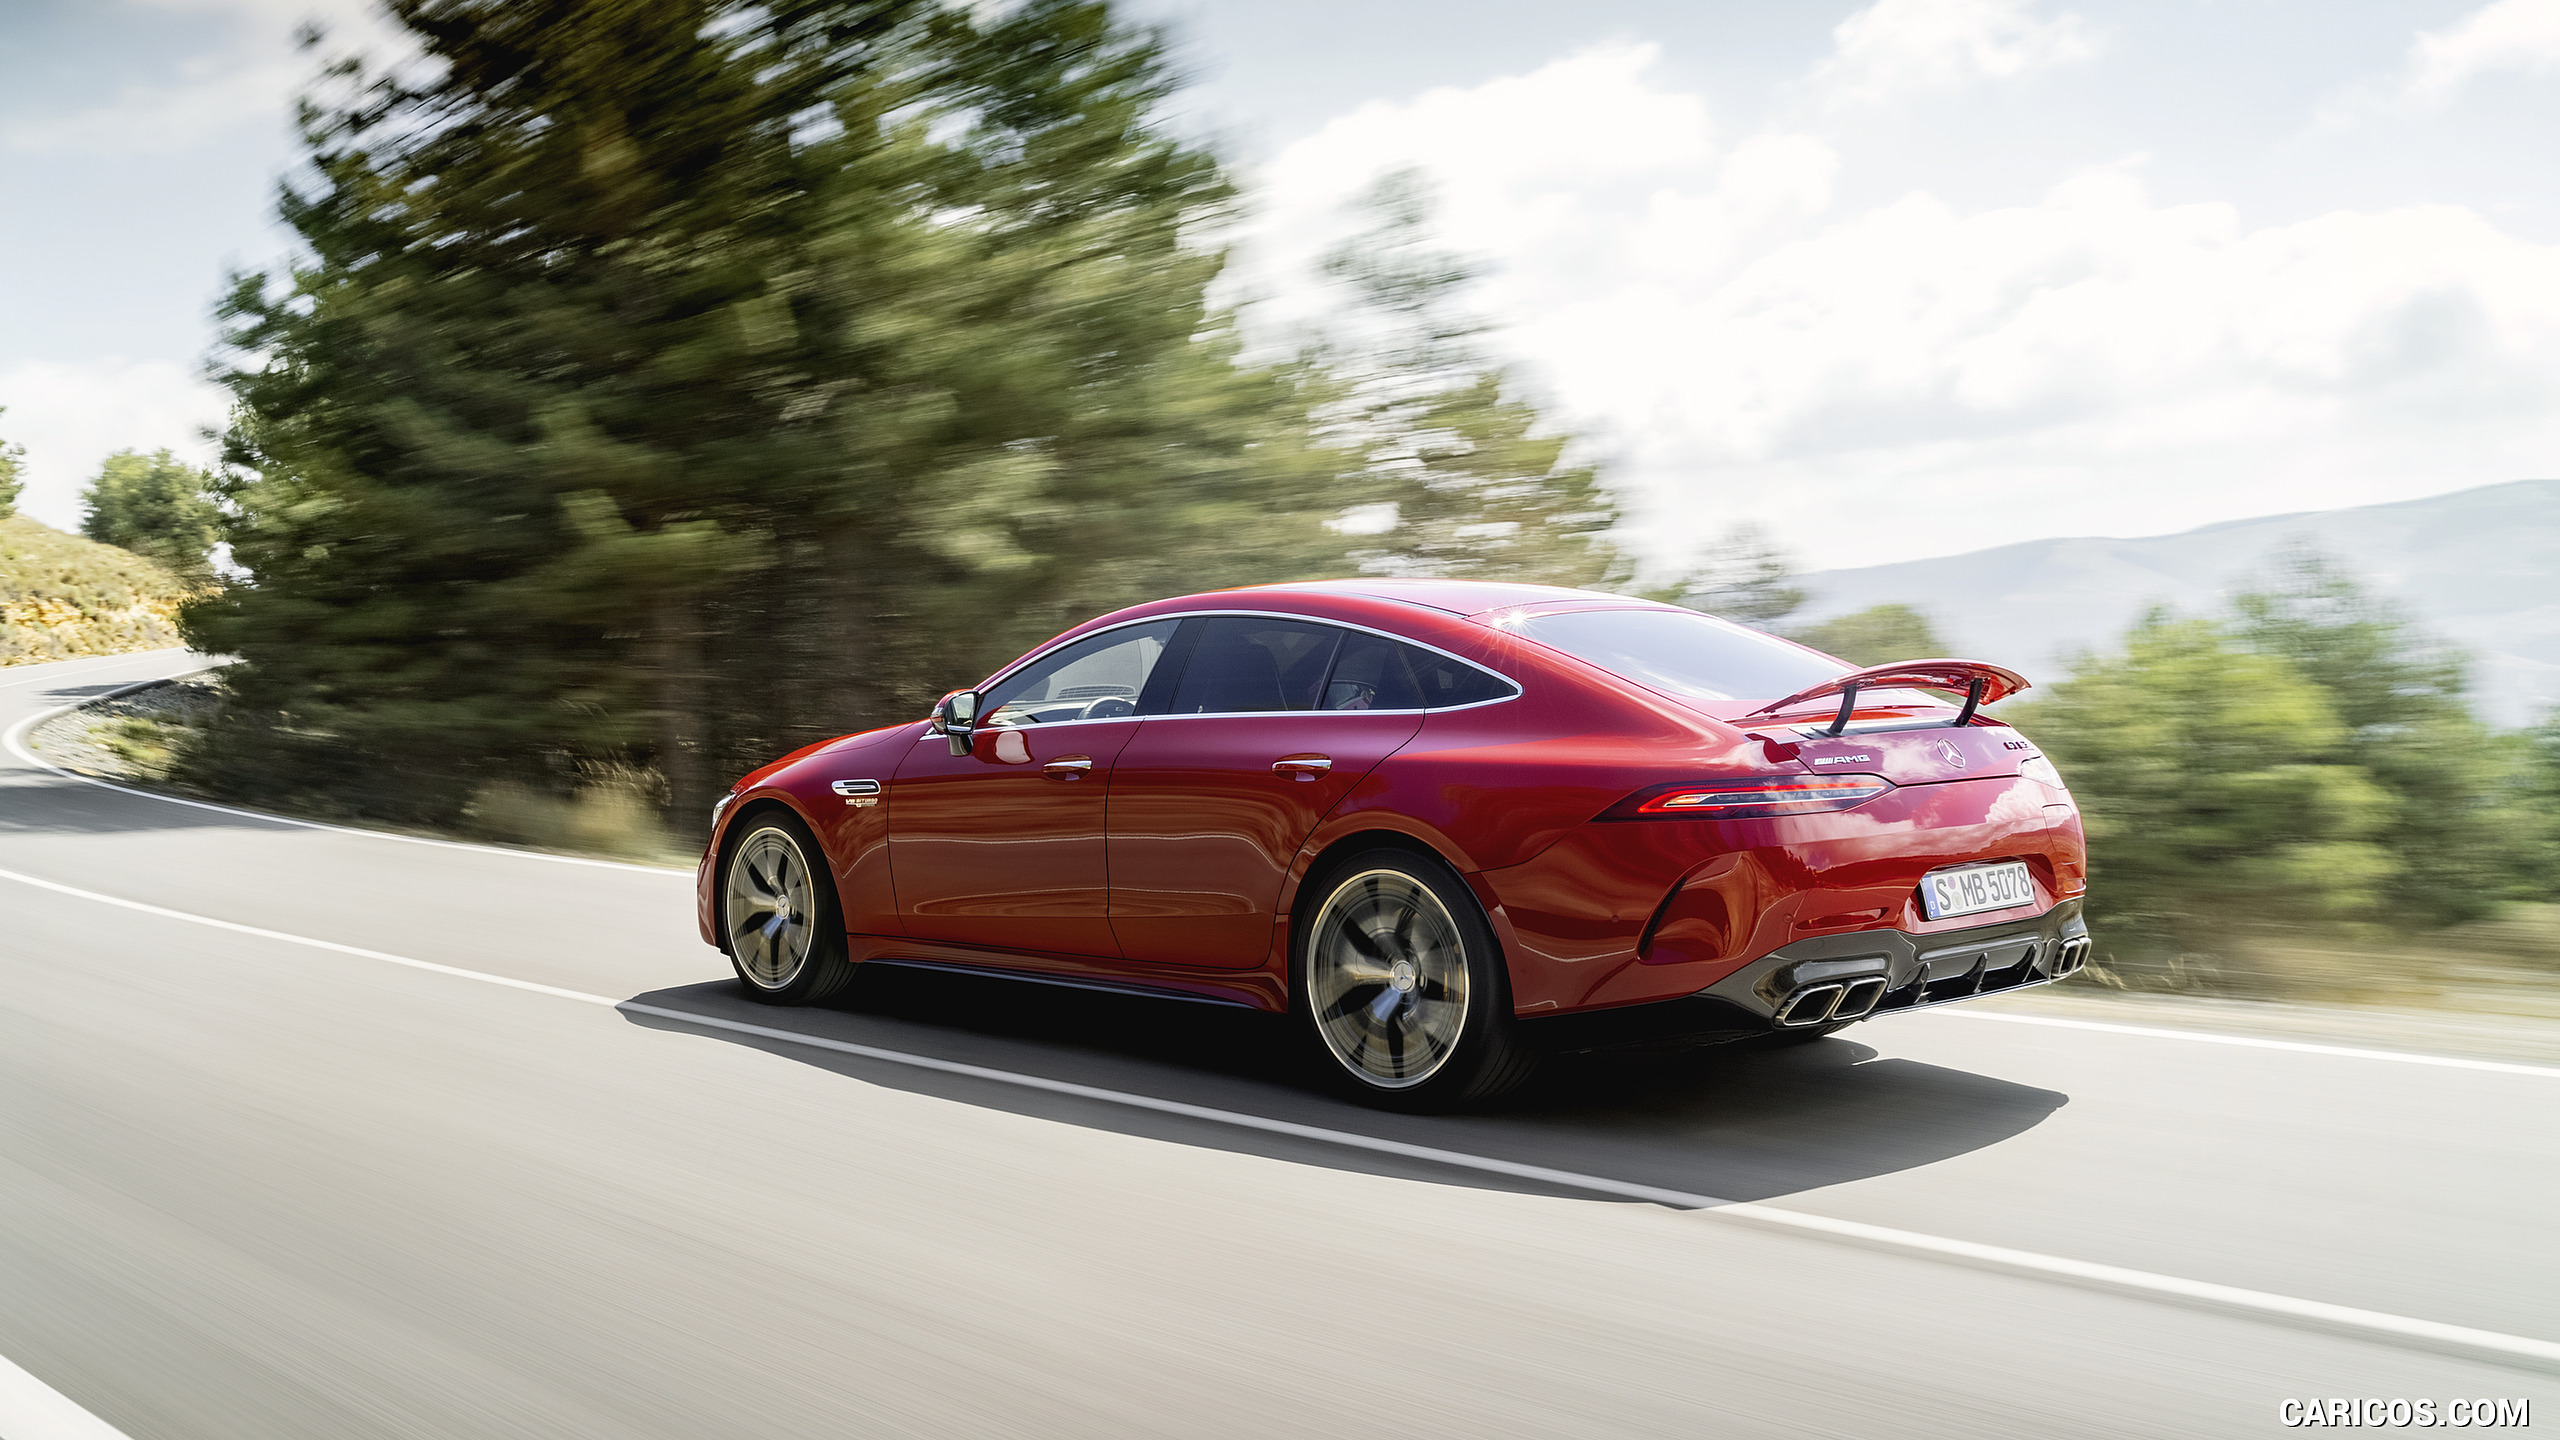 2022 Mercedes-AMG GT 63 S E Performance 4MATIC+ (Color: Jupiter Red) - Rear Three-Quarter, #3 of 88